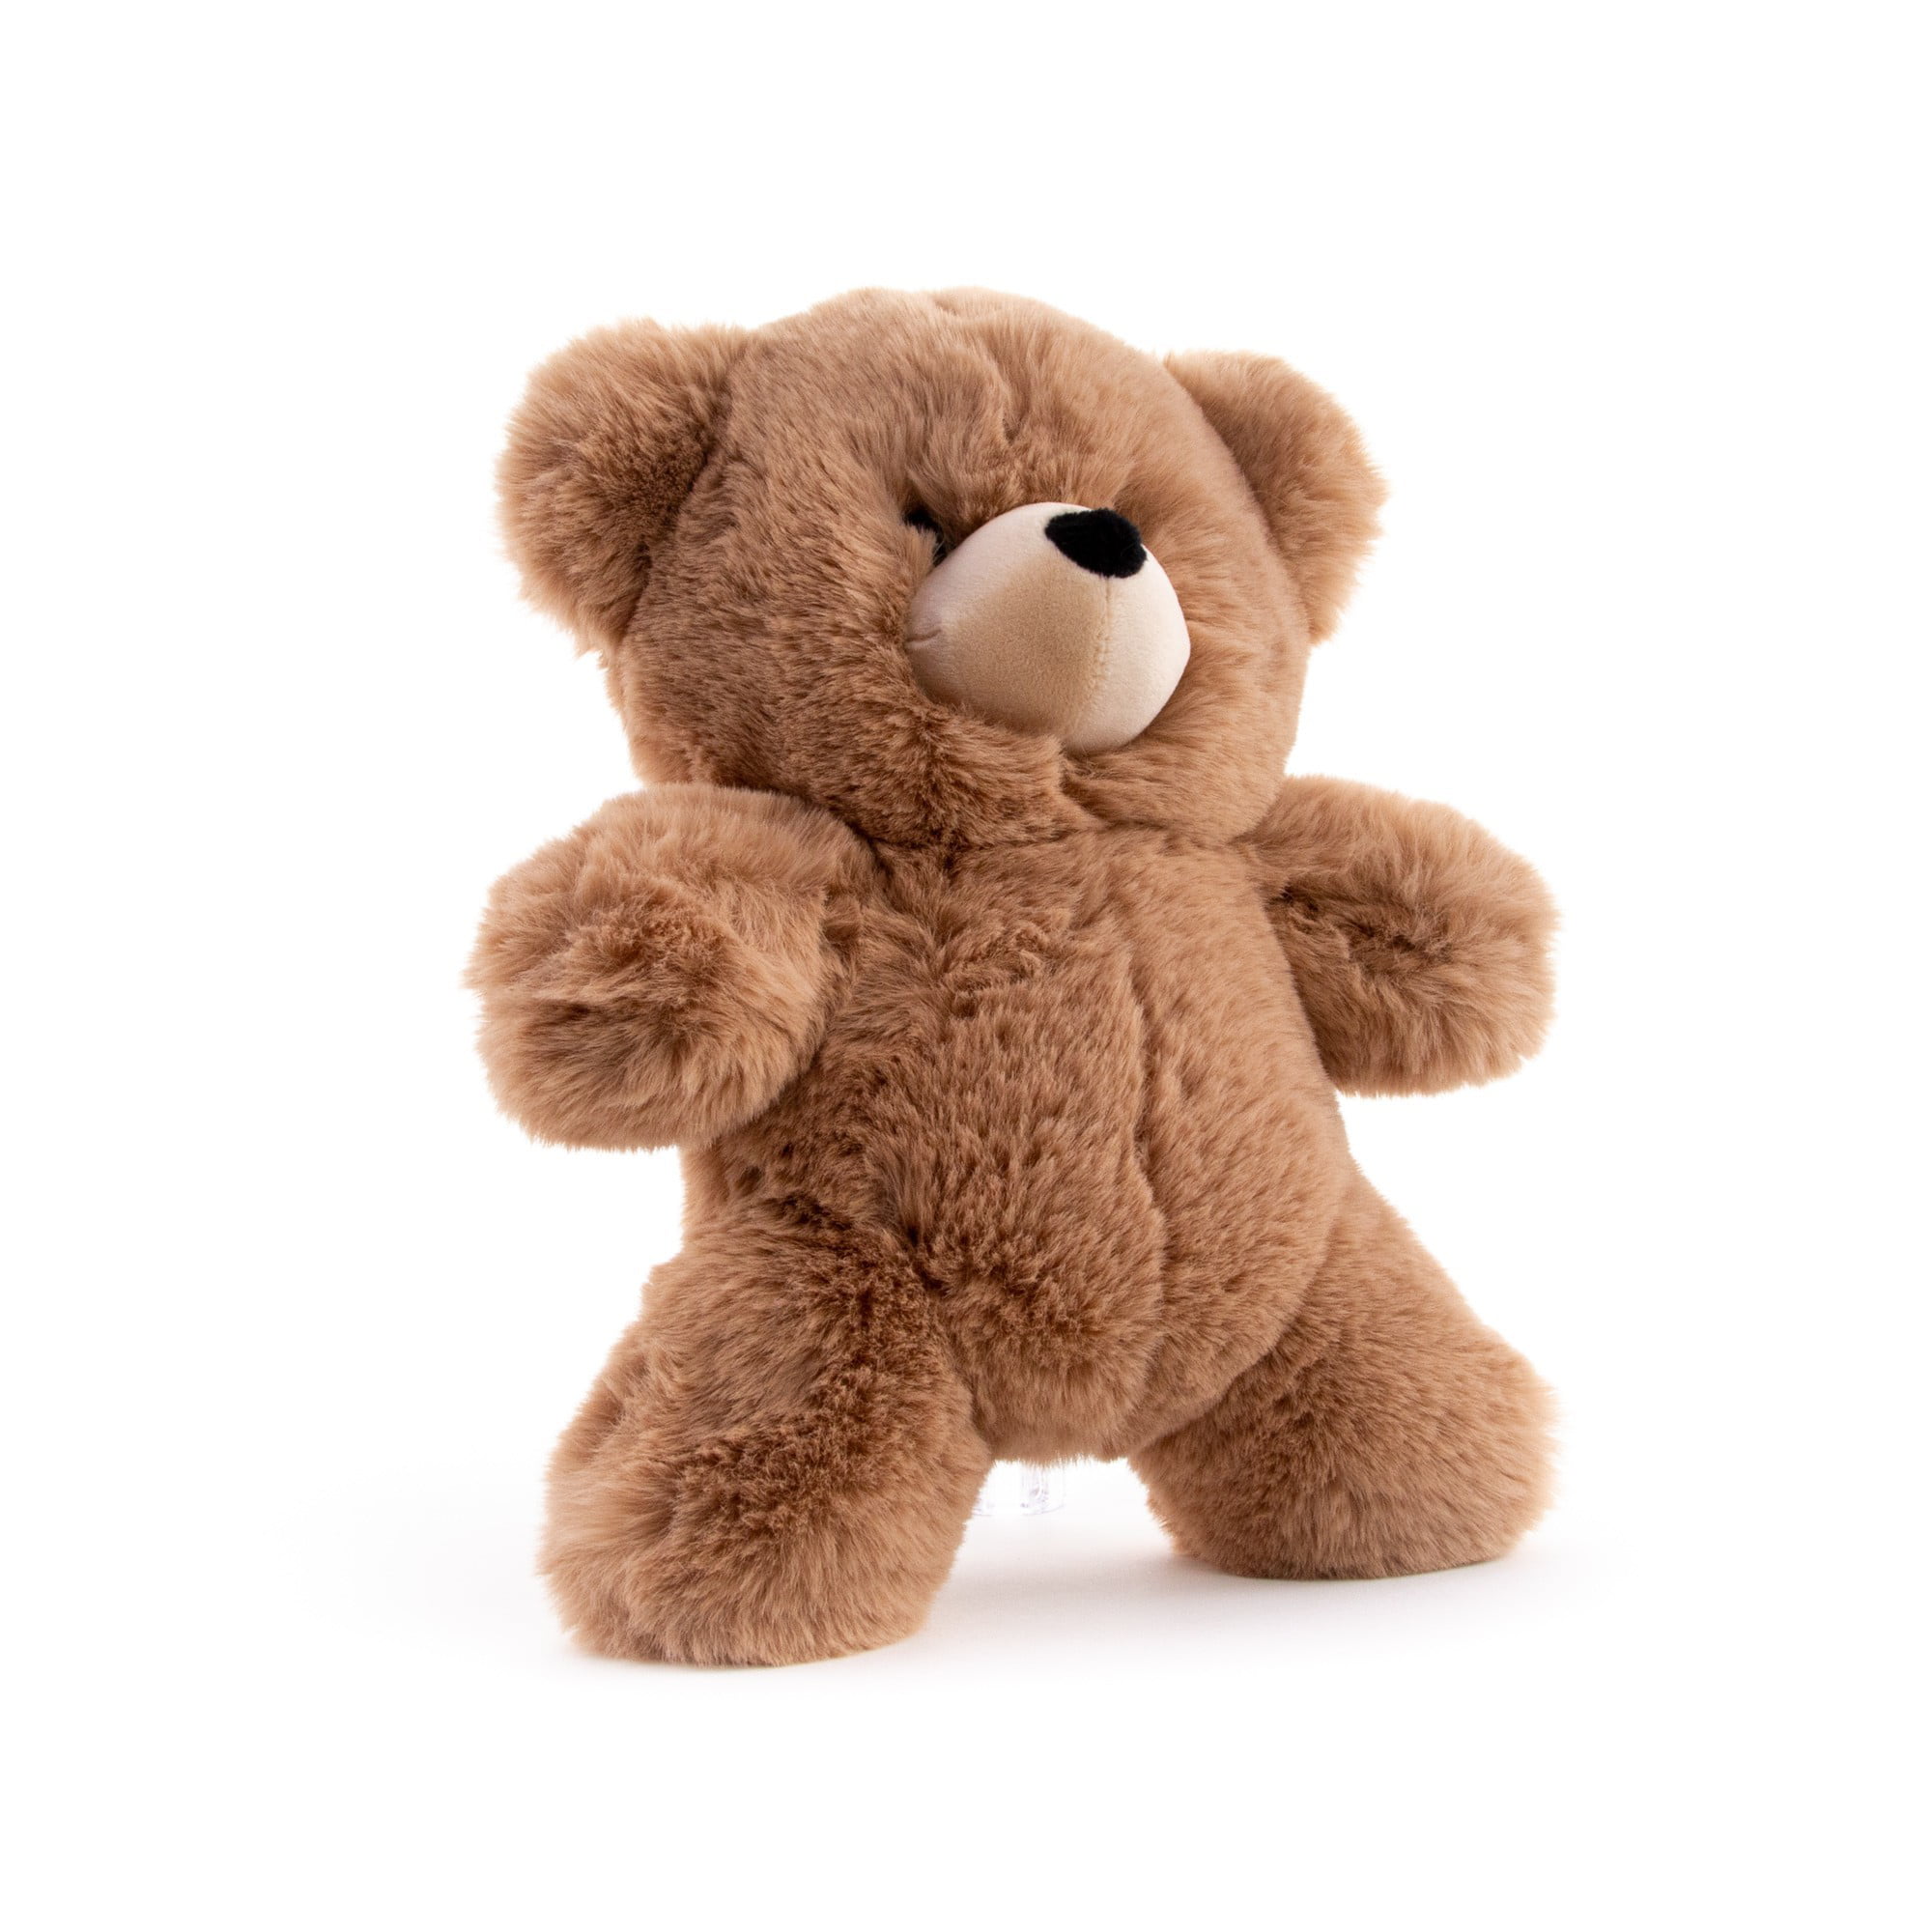 stores to buy teddy bears